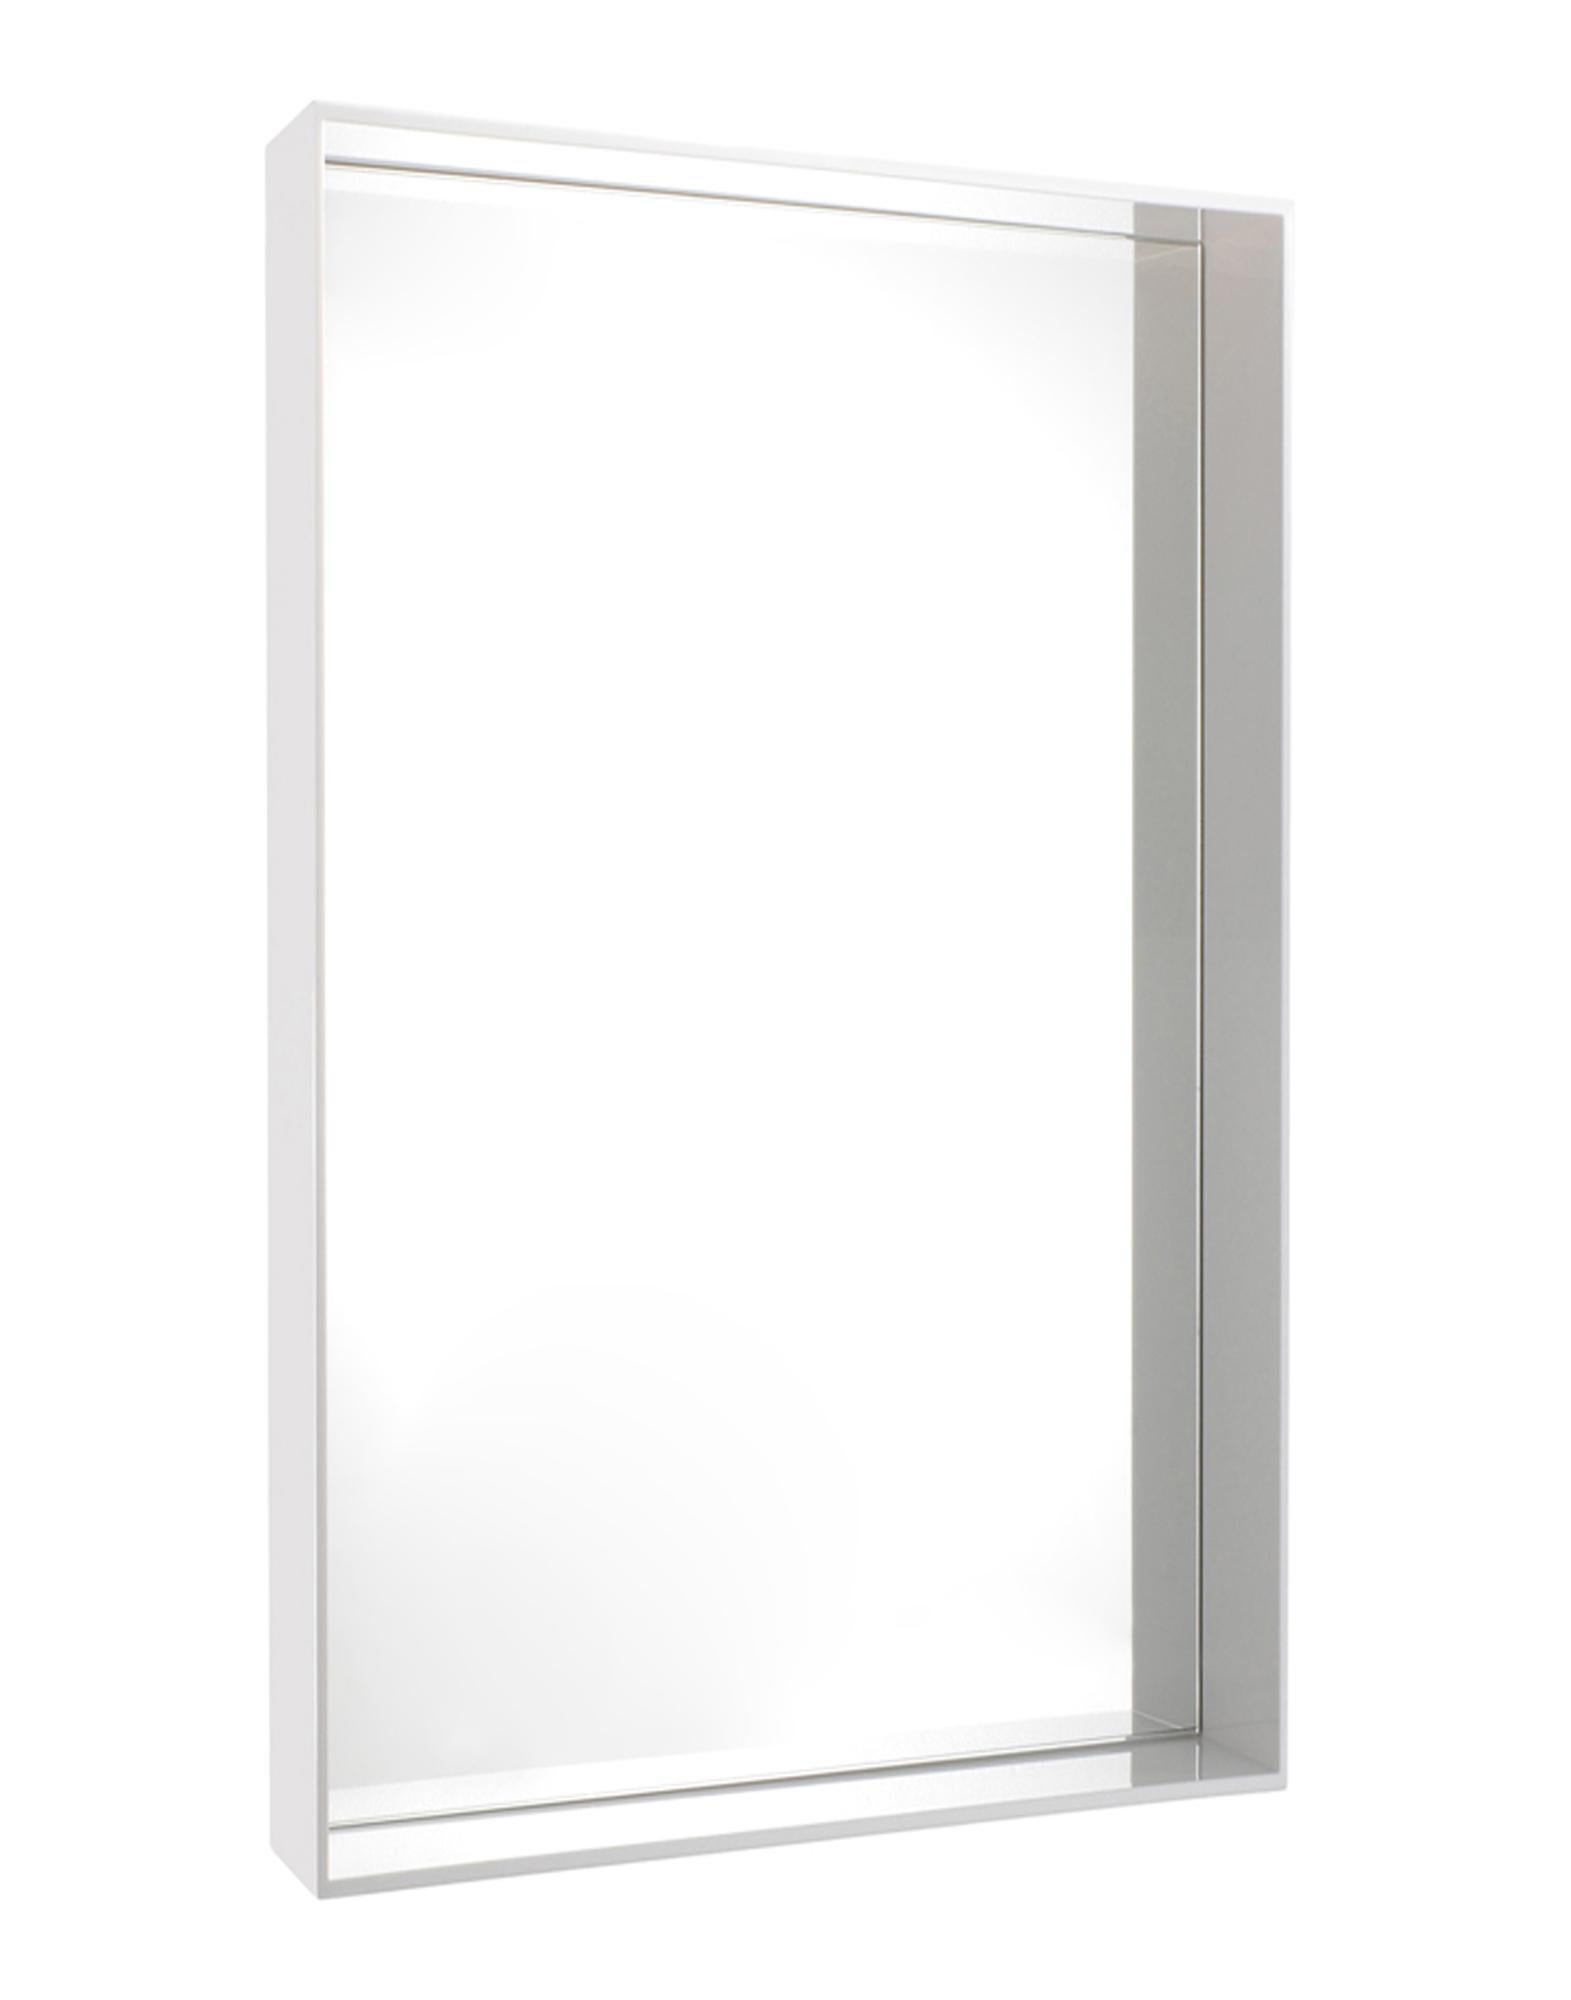 Only Me is a mirror with a slender frame in a variety of colours. Only Me is available in square and rectangular versions that can be hung in either direction.
 